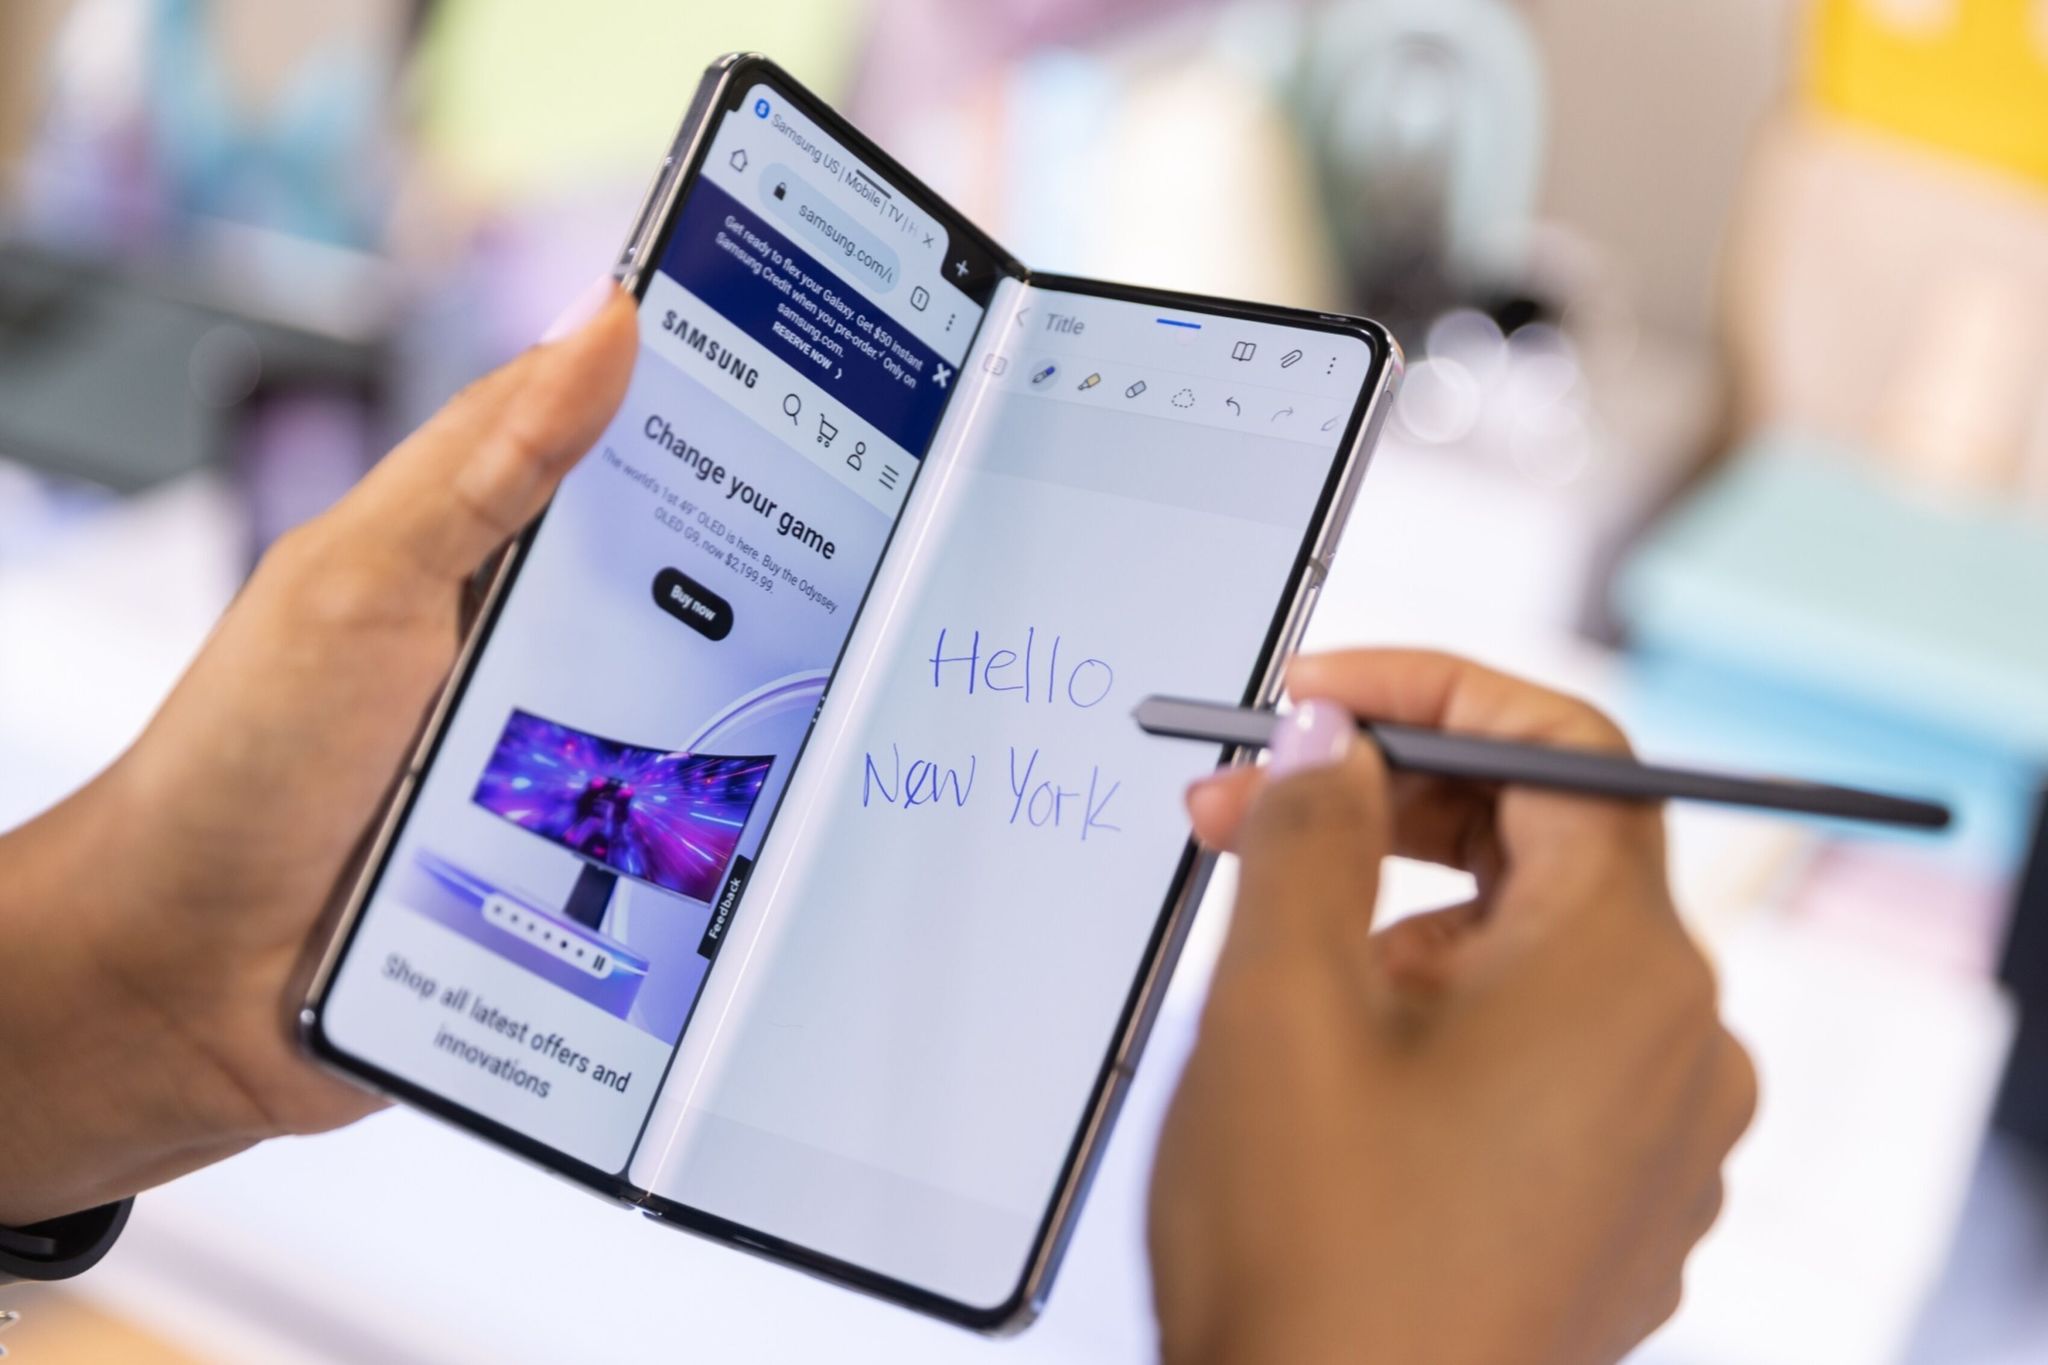 A  lt;HIT gt;Samsung lt;/HIT gt;  lt;HIT gt;Galaxy lt;/HIT gt; Z Fold 5 smartphone with an S pen fold edition during an event in New York, US, on Friday, July 21, 2023.  lt;HIT gt;Samsung lt;/HIT gt; Electronics Co. introduced the fifth generation of its foldable smartphones on Wednesday, seeking to counter a sluggish market for devices and upcoming rival products from Apple Inc. Photographer: Jeenah Moon/Bloomberg